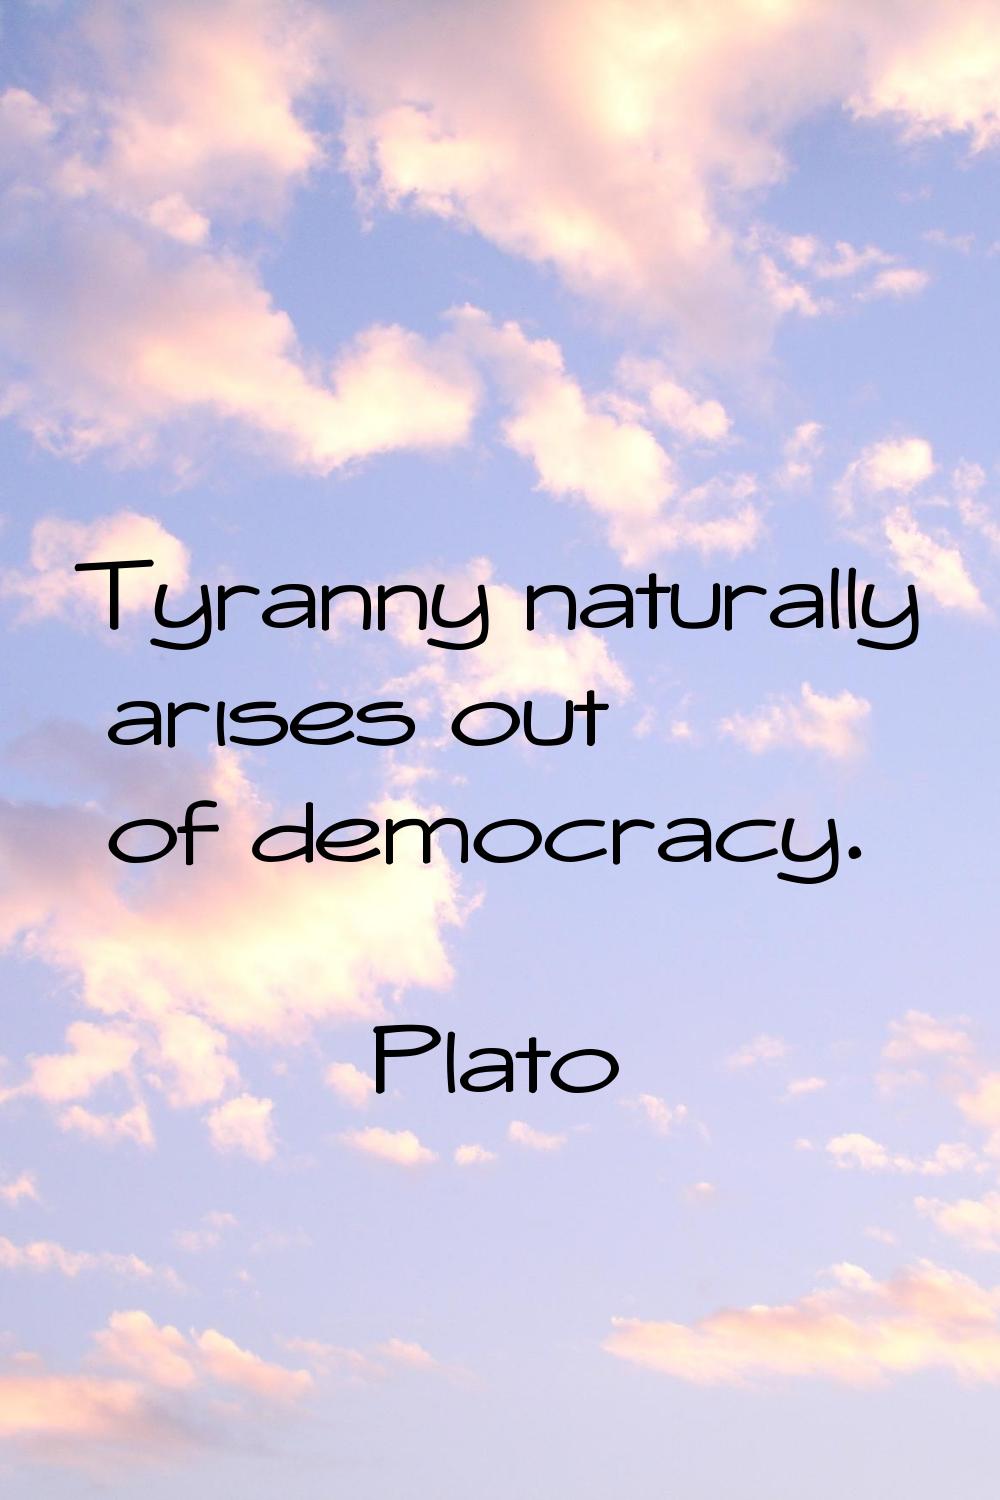 Tyranny naturally arises out of democracy.